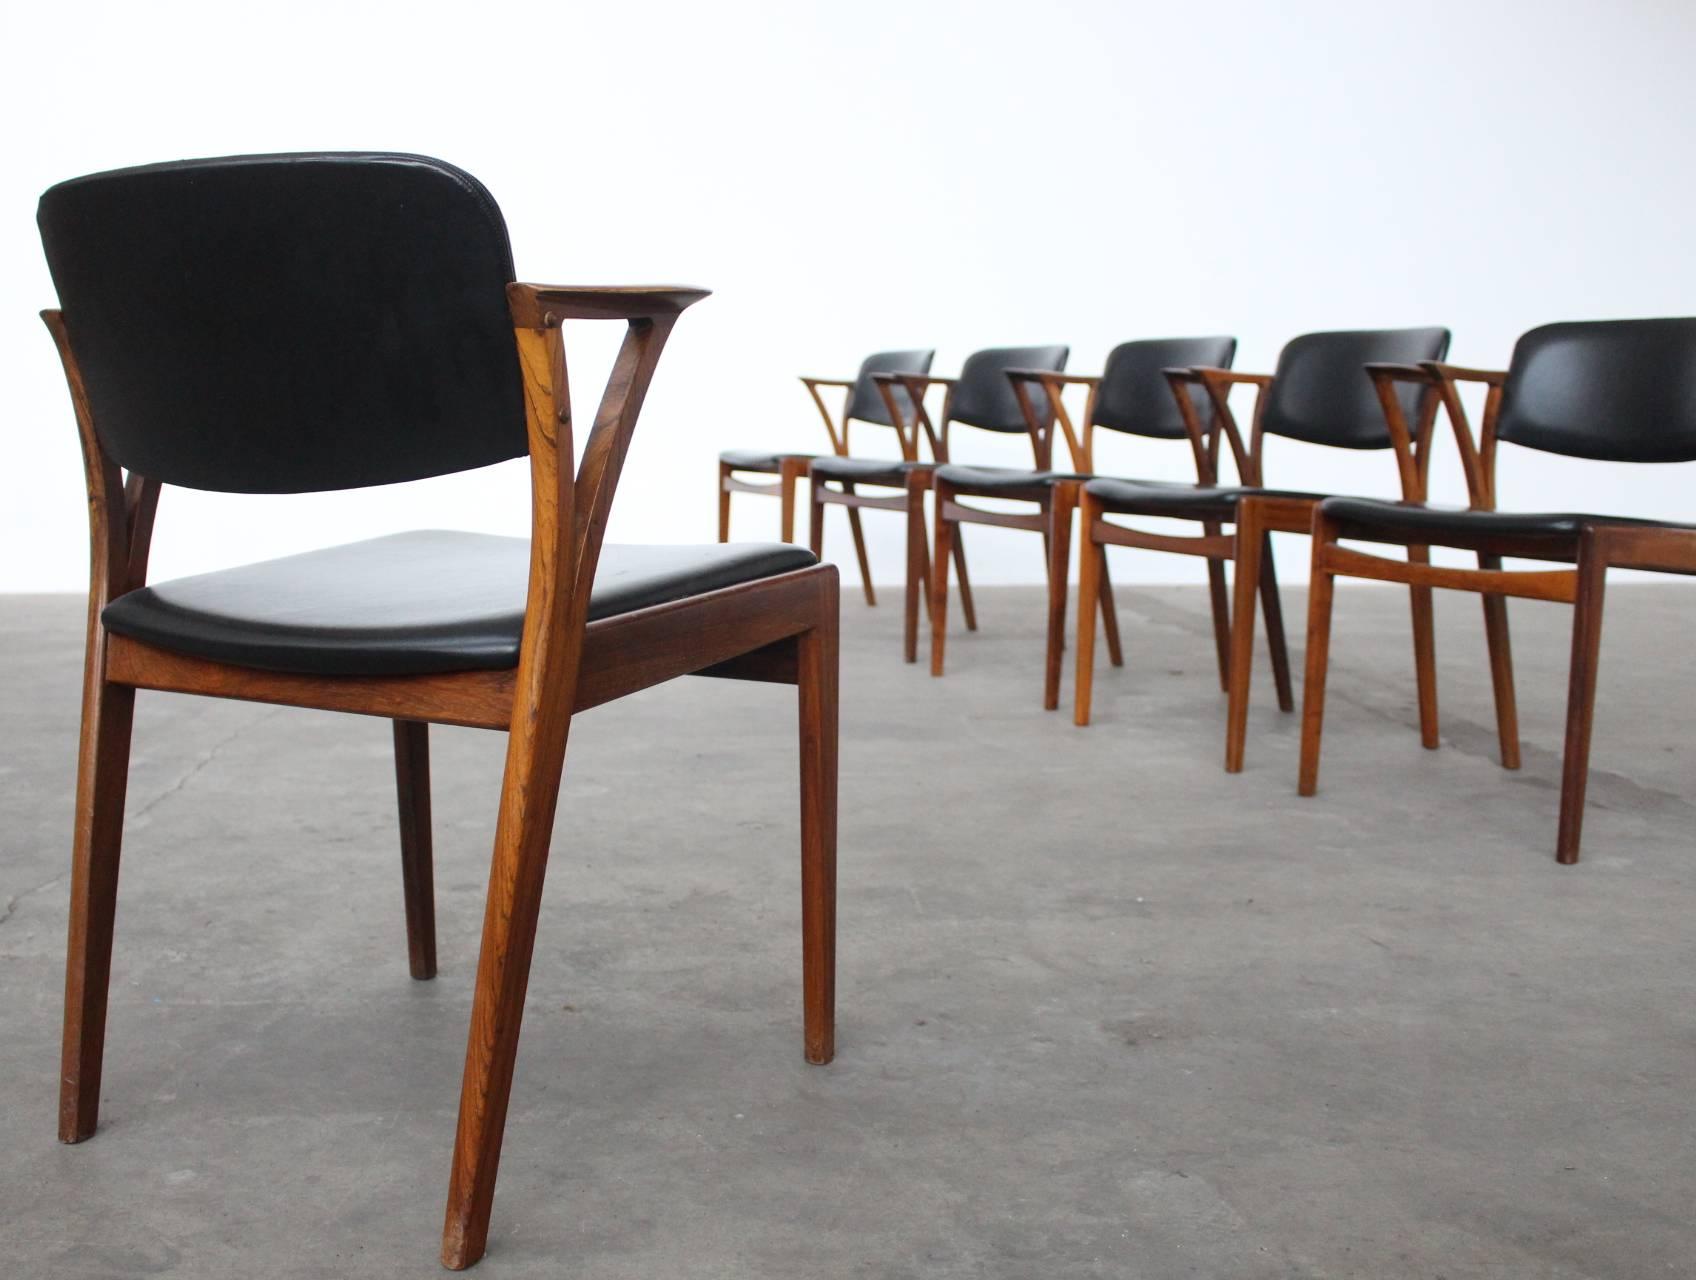 Beautiful rare set of six dining chairs by Kai Kristiansen and produced by Bovenkamp Furniture, 1960s.
The frames of the chairs are built out of Brazilian rosewood and do have a very nice shape. The seats and backrests are upholstered in high